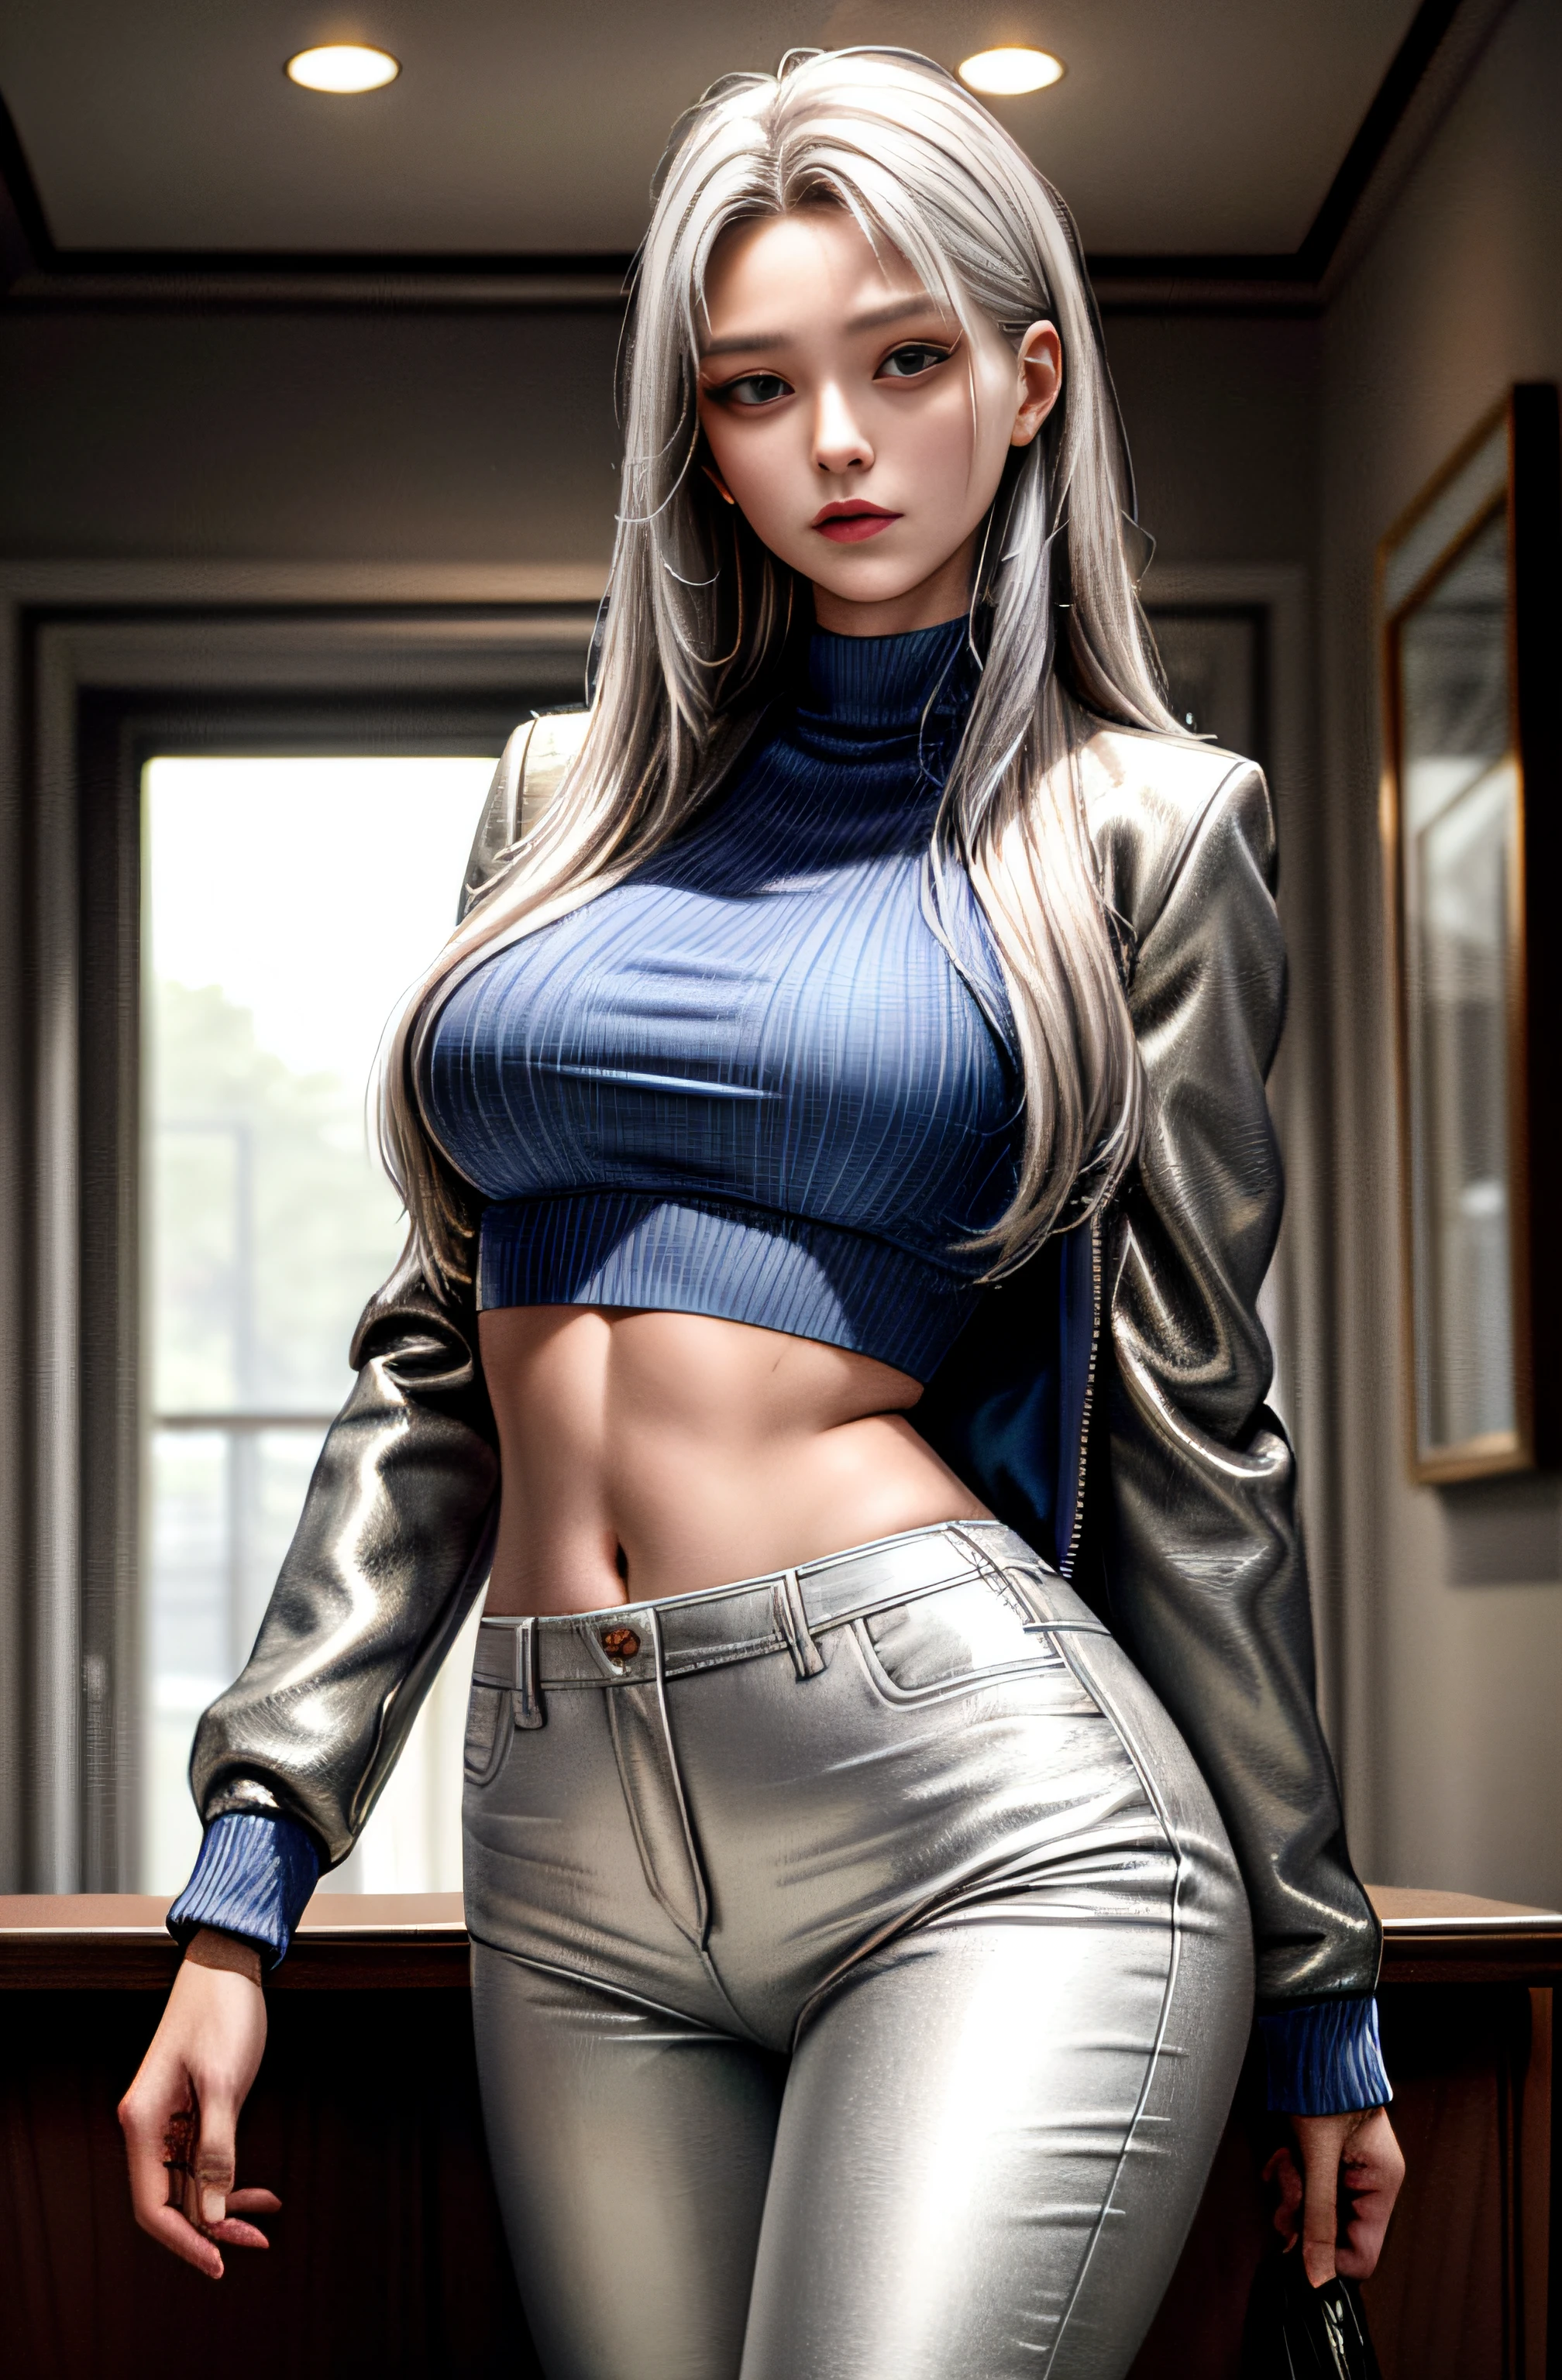 Best quality, Masterpiece, Portrait, Perfect anatomy, Flawless, 1womanl, Solo, Sexy, Stylish, mature, Silver pants, croptop, Jacket, Long hair, Feminine, Cool, queen, Correct female anatomy,